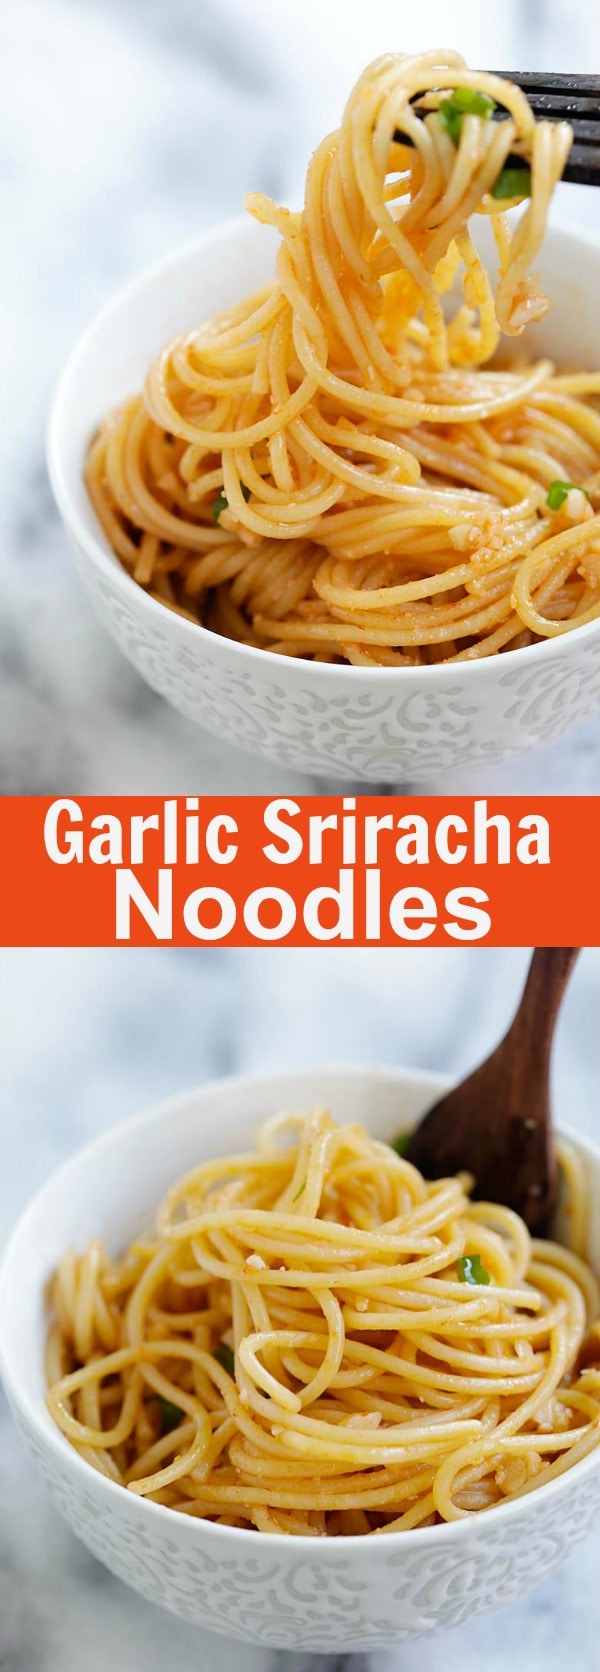 Garlic Sriracha Noodles - easy and crazy delicious garlic noodles with Sriracha. Savory, buttery with a tint of heat. Dinner is done in 15 mins | rasamalaysia.com